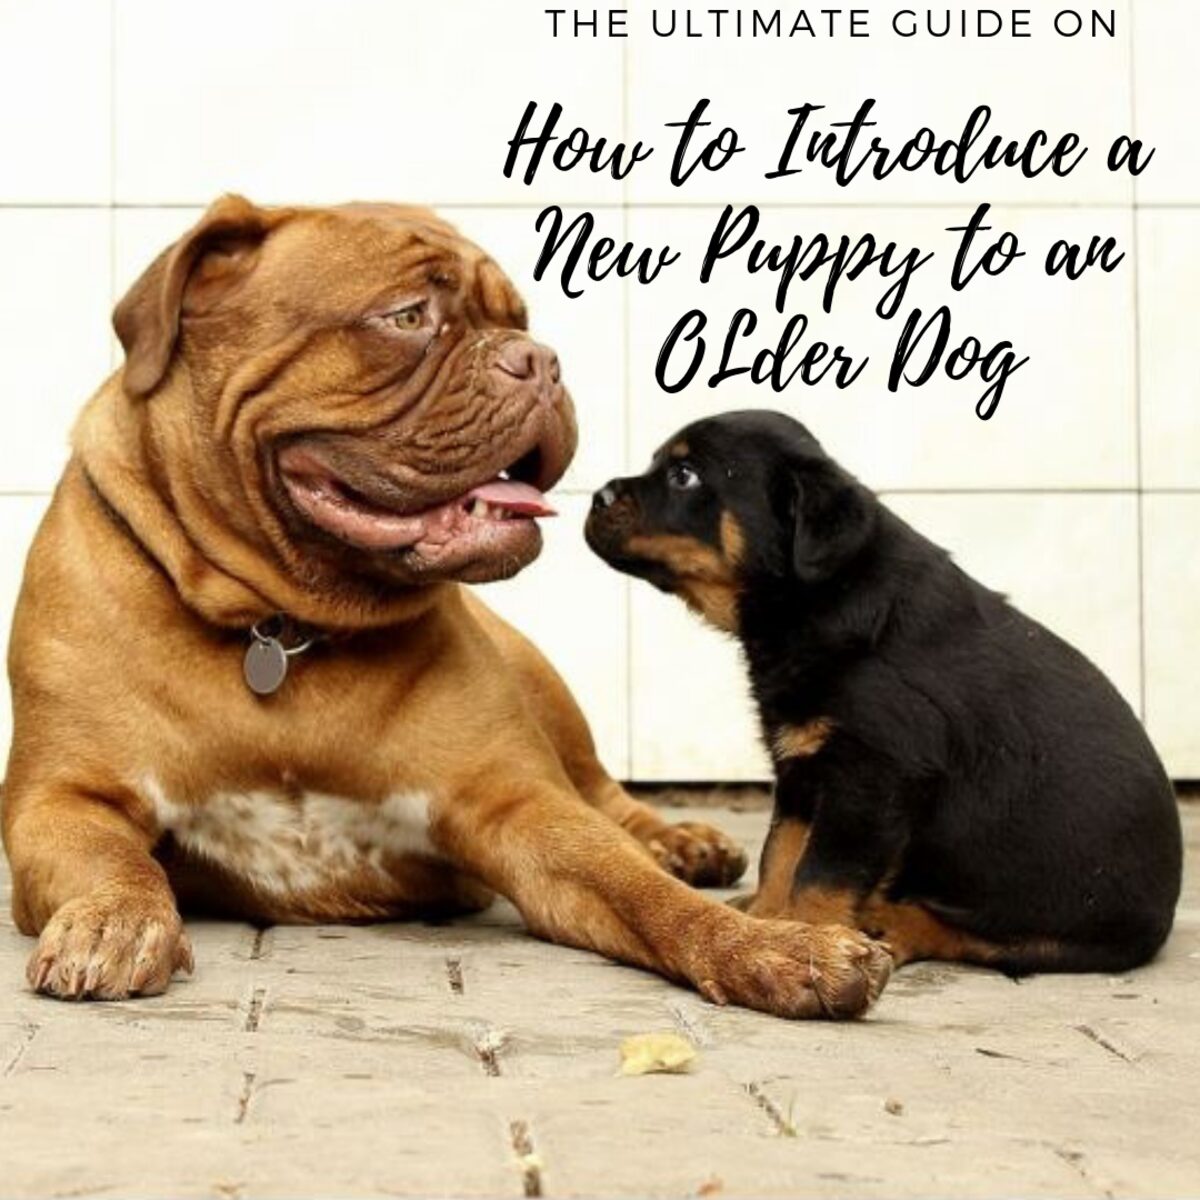 How to Train an Older Dog to Accept a New Puppy-WildCreaturey